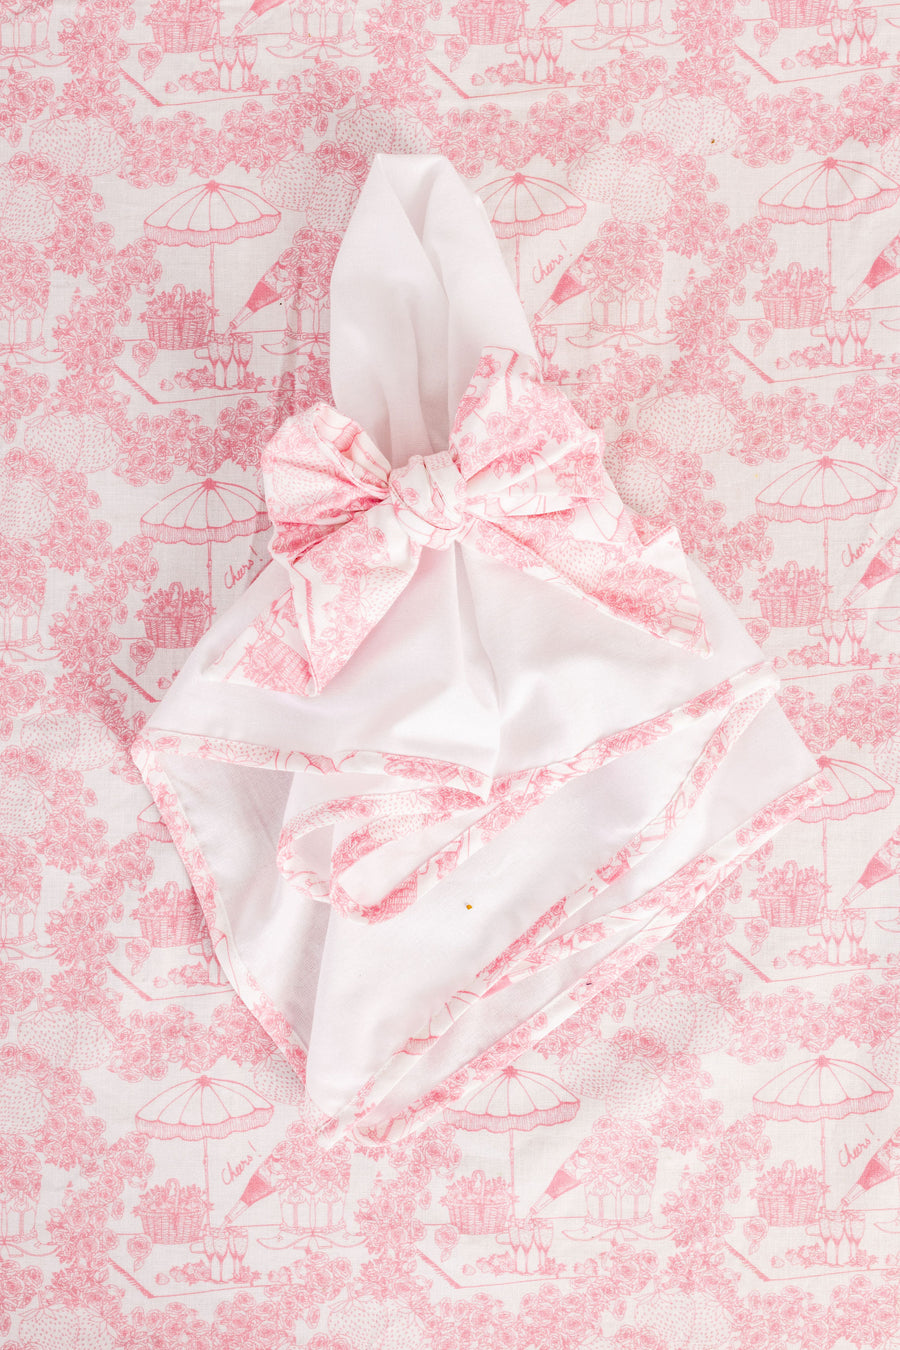 Napkin Ring Set Pink Picnic Toile *Limited*Edition*